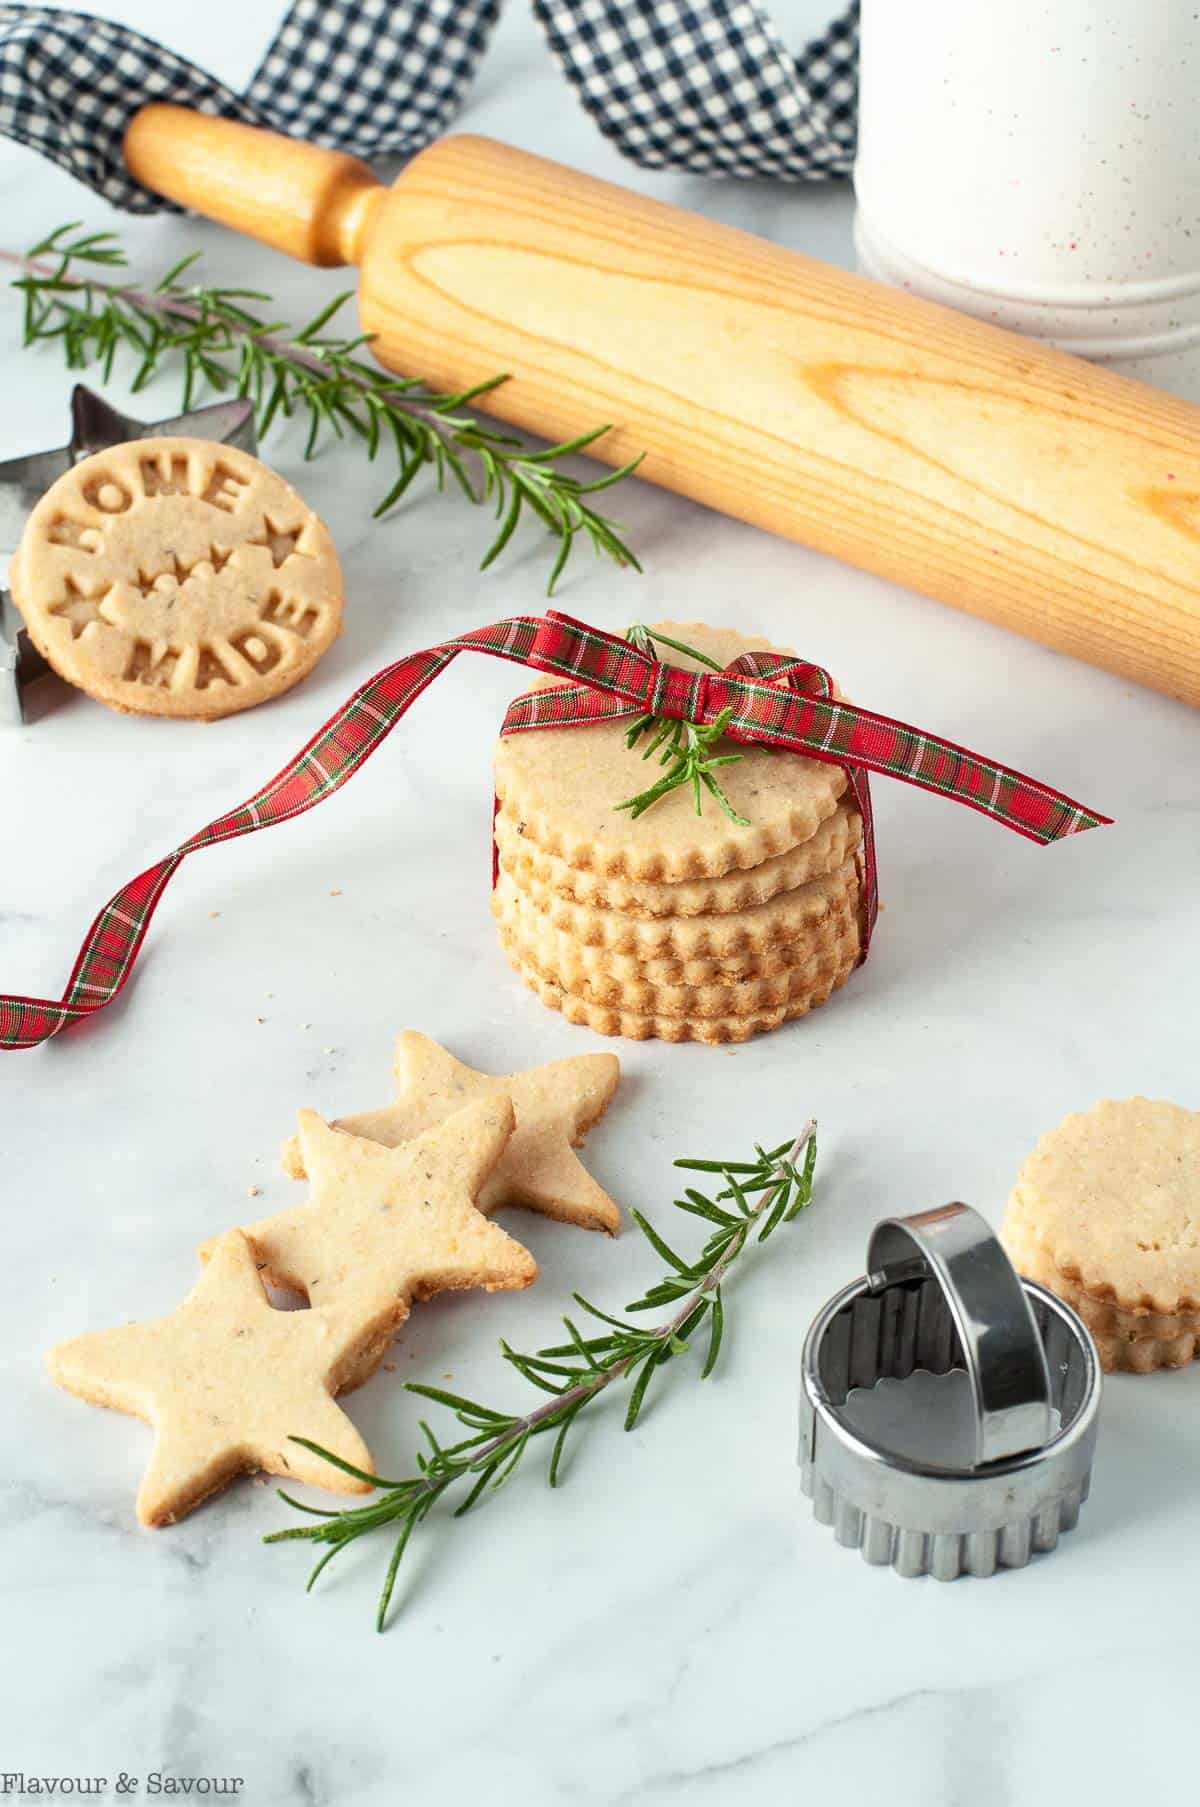 https://www.flavourandsavour.com/wp-content/uploads/2020/11/Rosemary-Shortbread-Cookies-tied-with-ribbon-1.jpg